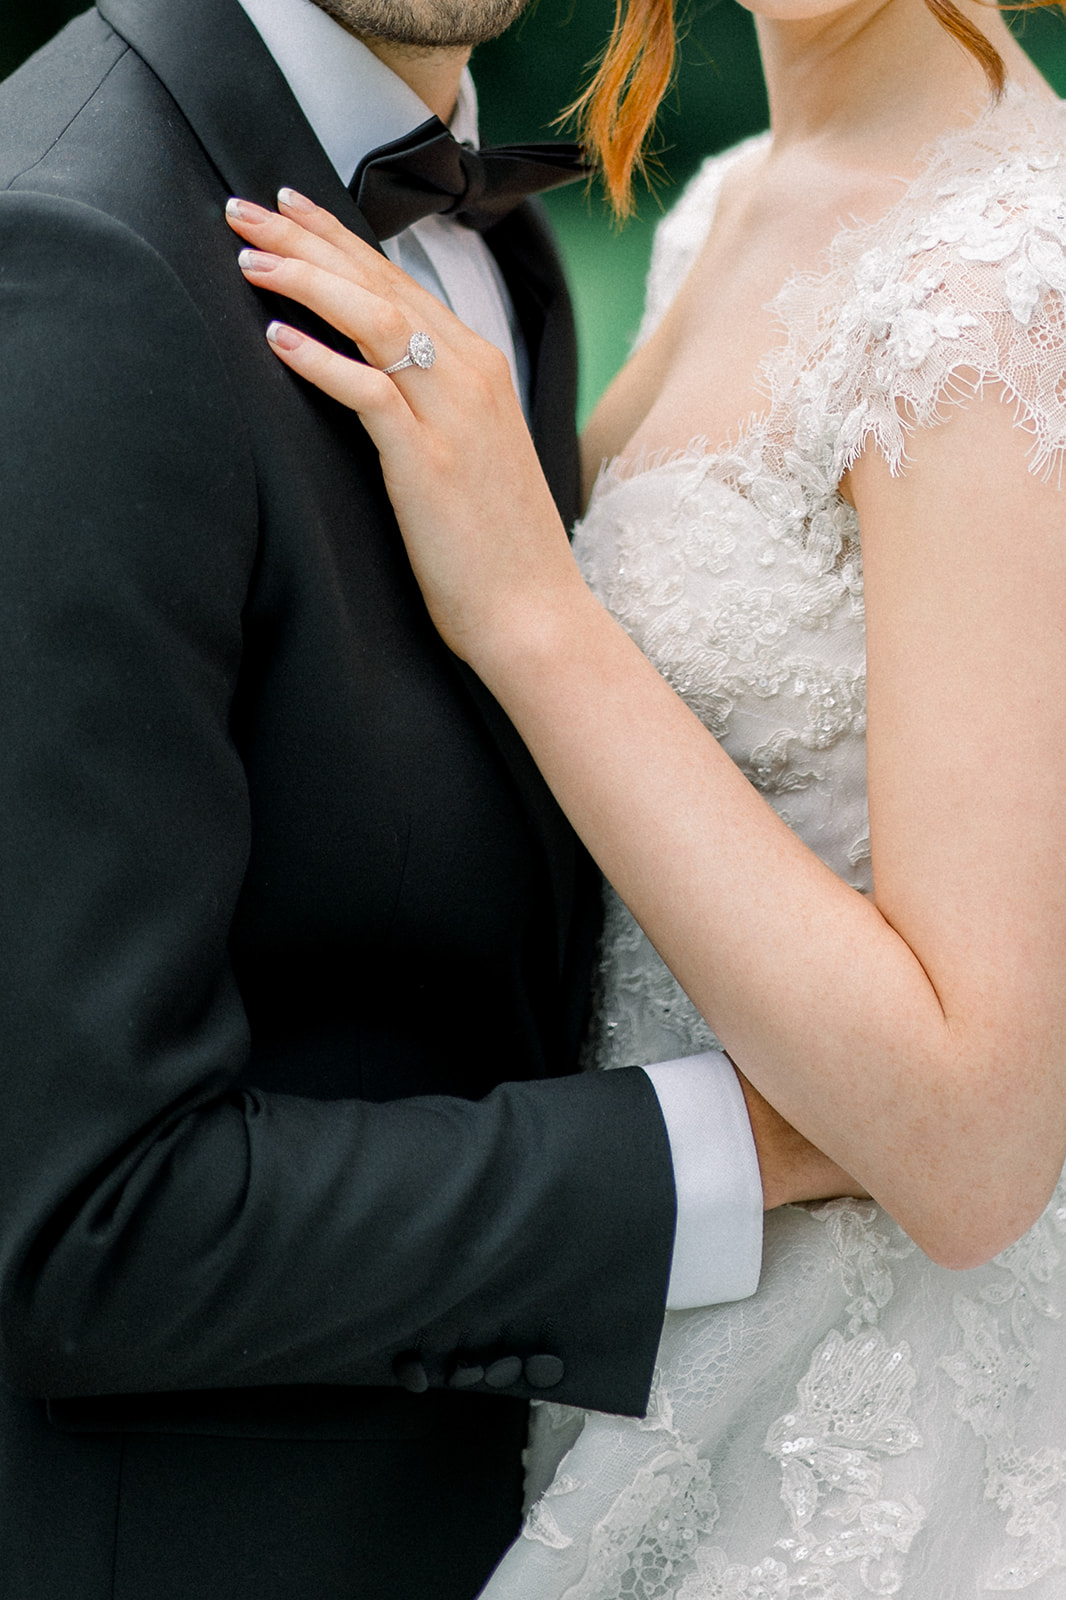 Close-up of a couple's intimate embrace, with focus on the bride's lace sleeve and the groom's black bow tie.